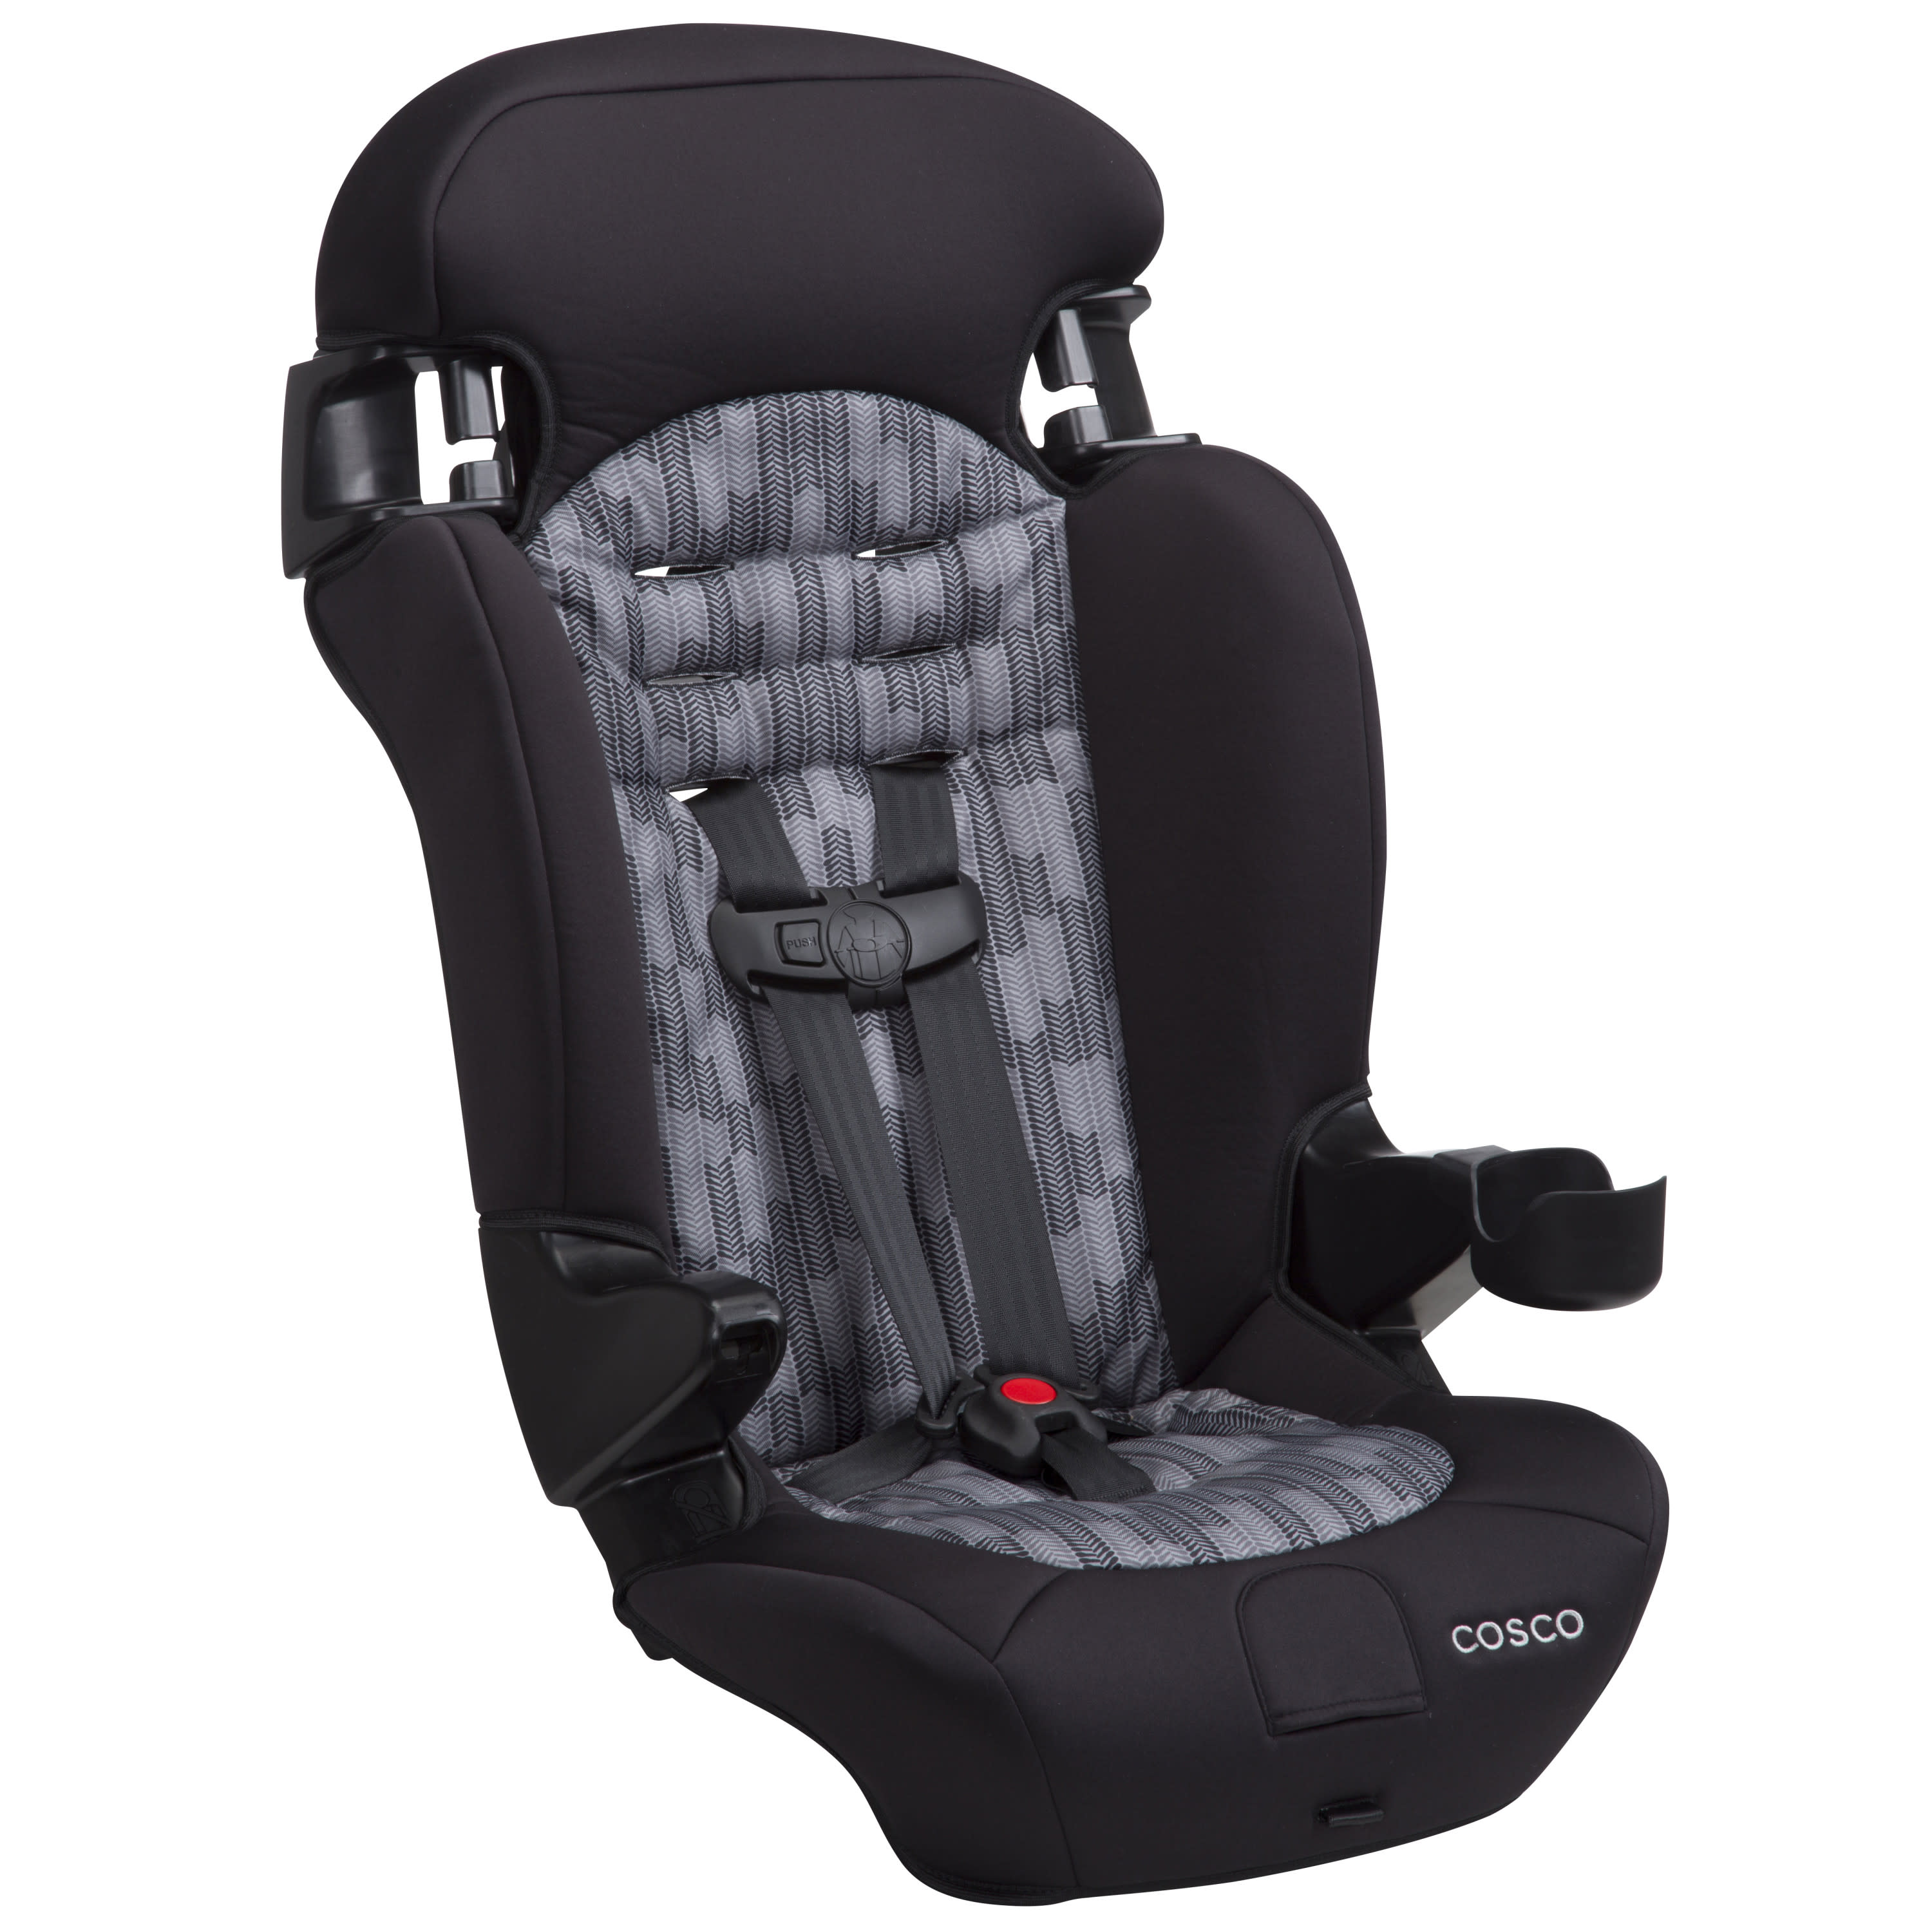 Cosco Finale 2-in-1 Booster Car Seat, Flight - image 2 of 17